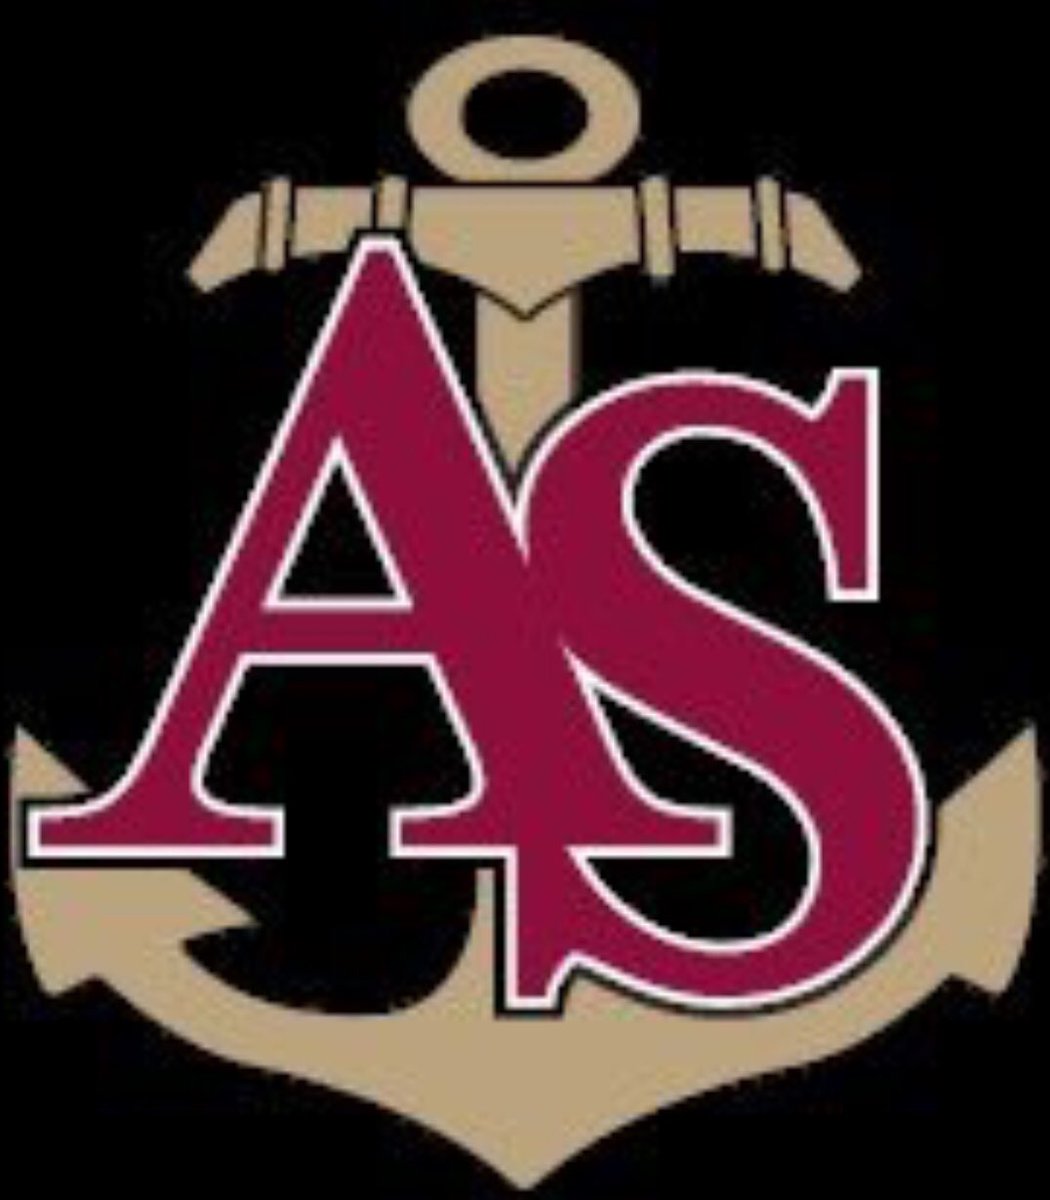 Truly Blessed and grateful to say I have recieved my 2nd offer to Apprentice School💯🙏🏽🏈⚓️⚓️⚓️ @HawkMgmt @coachporterAS @MFGE2015